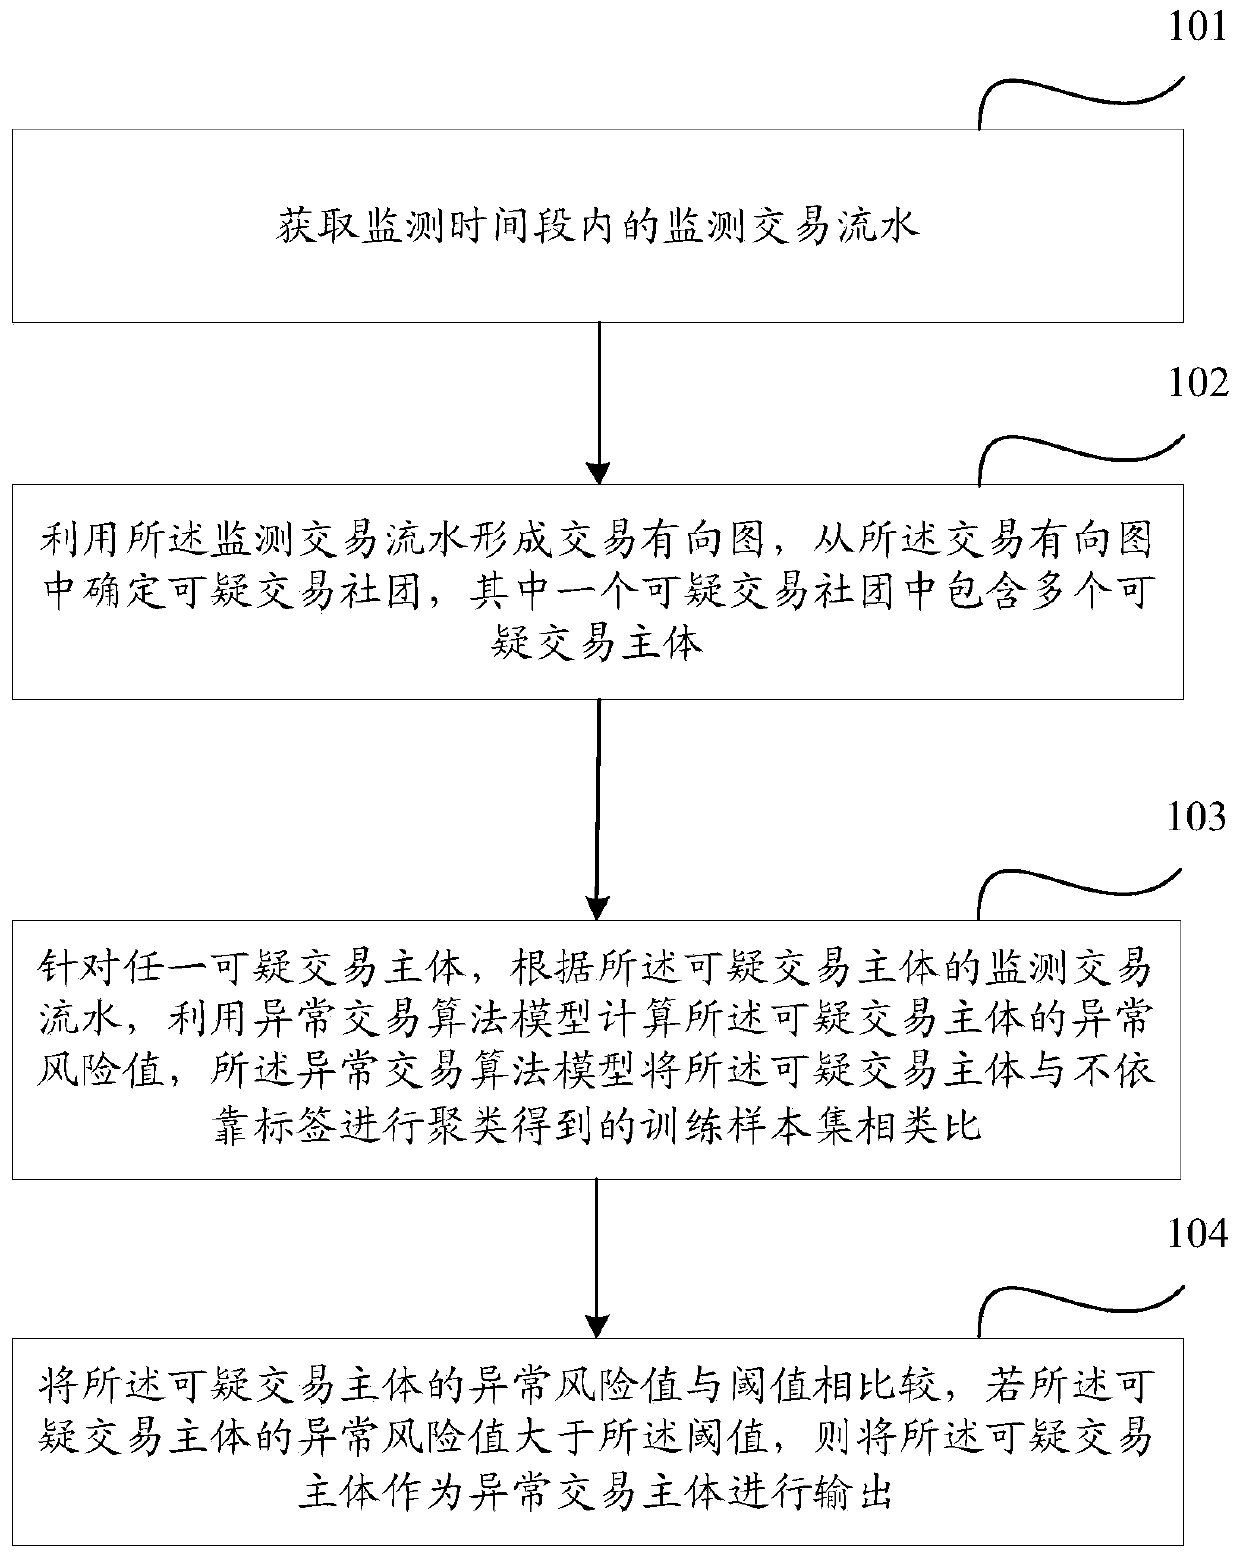 A transaction monitoring method and device